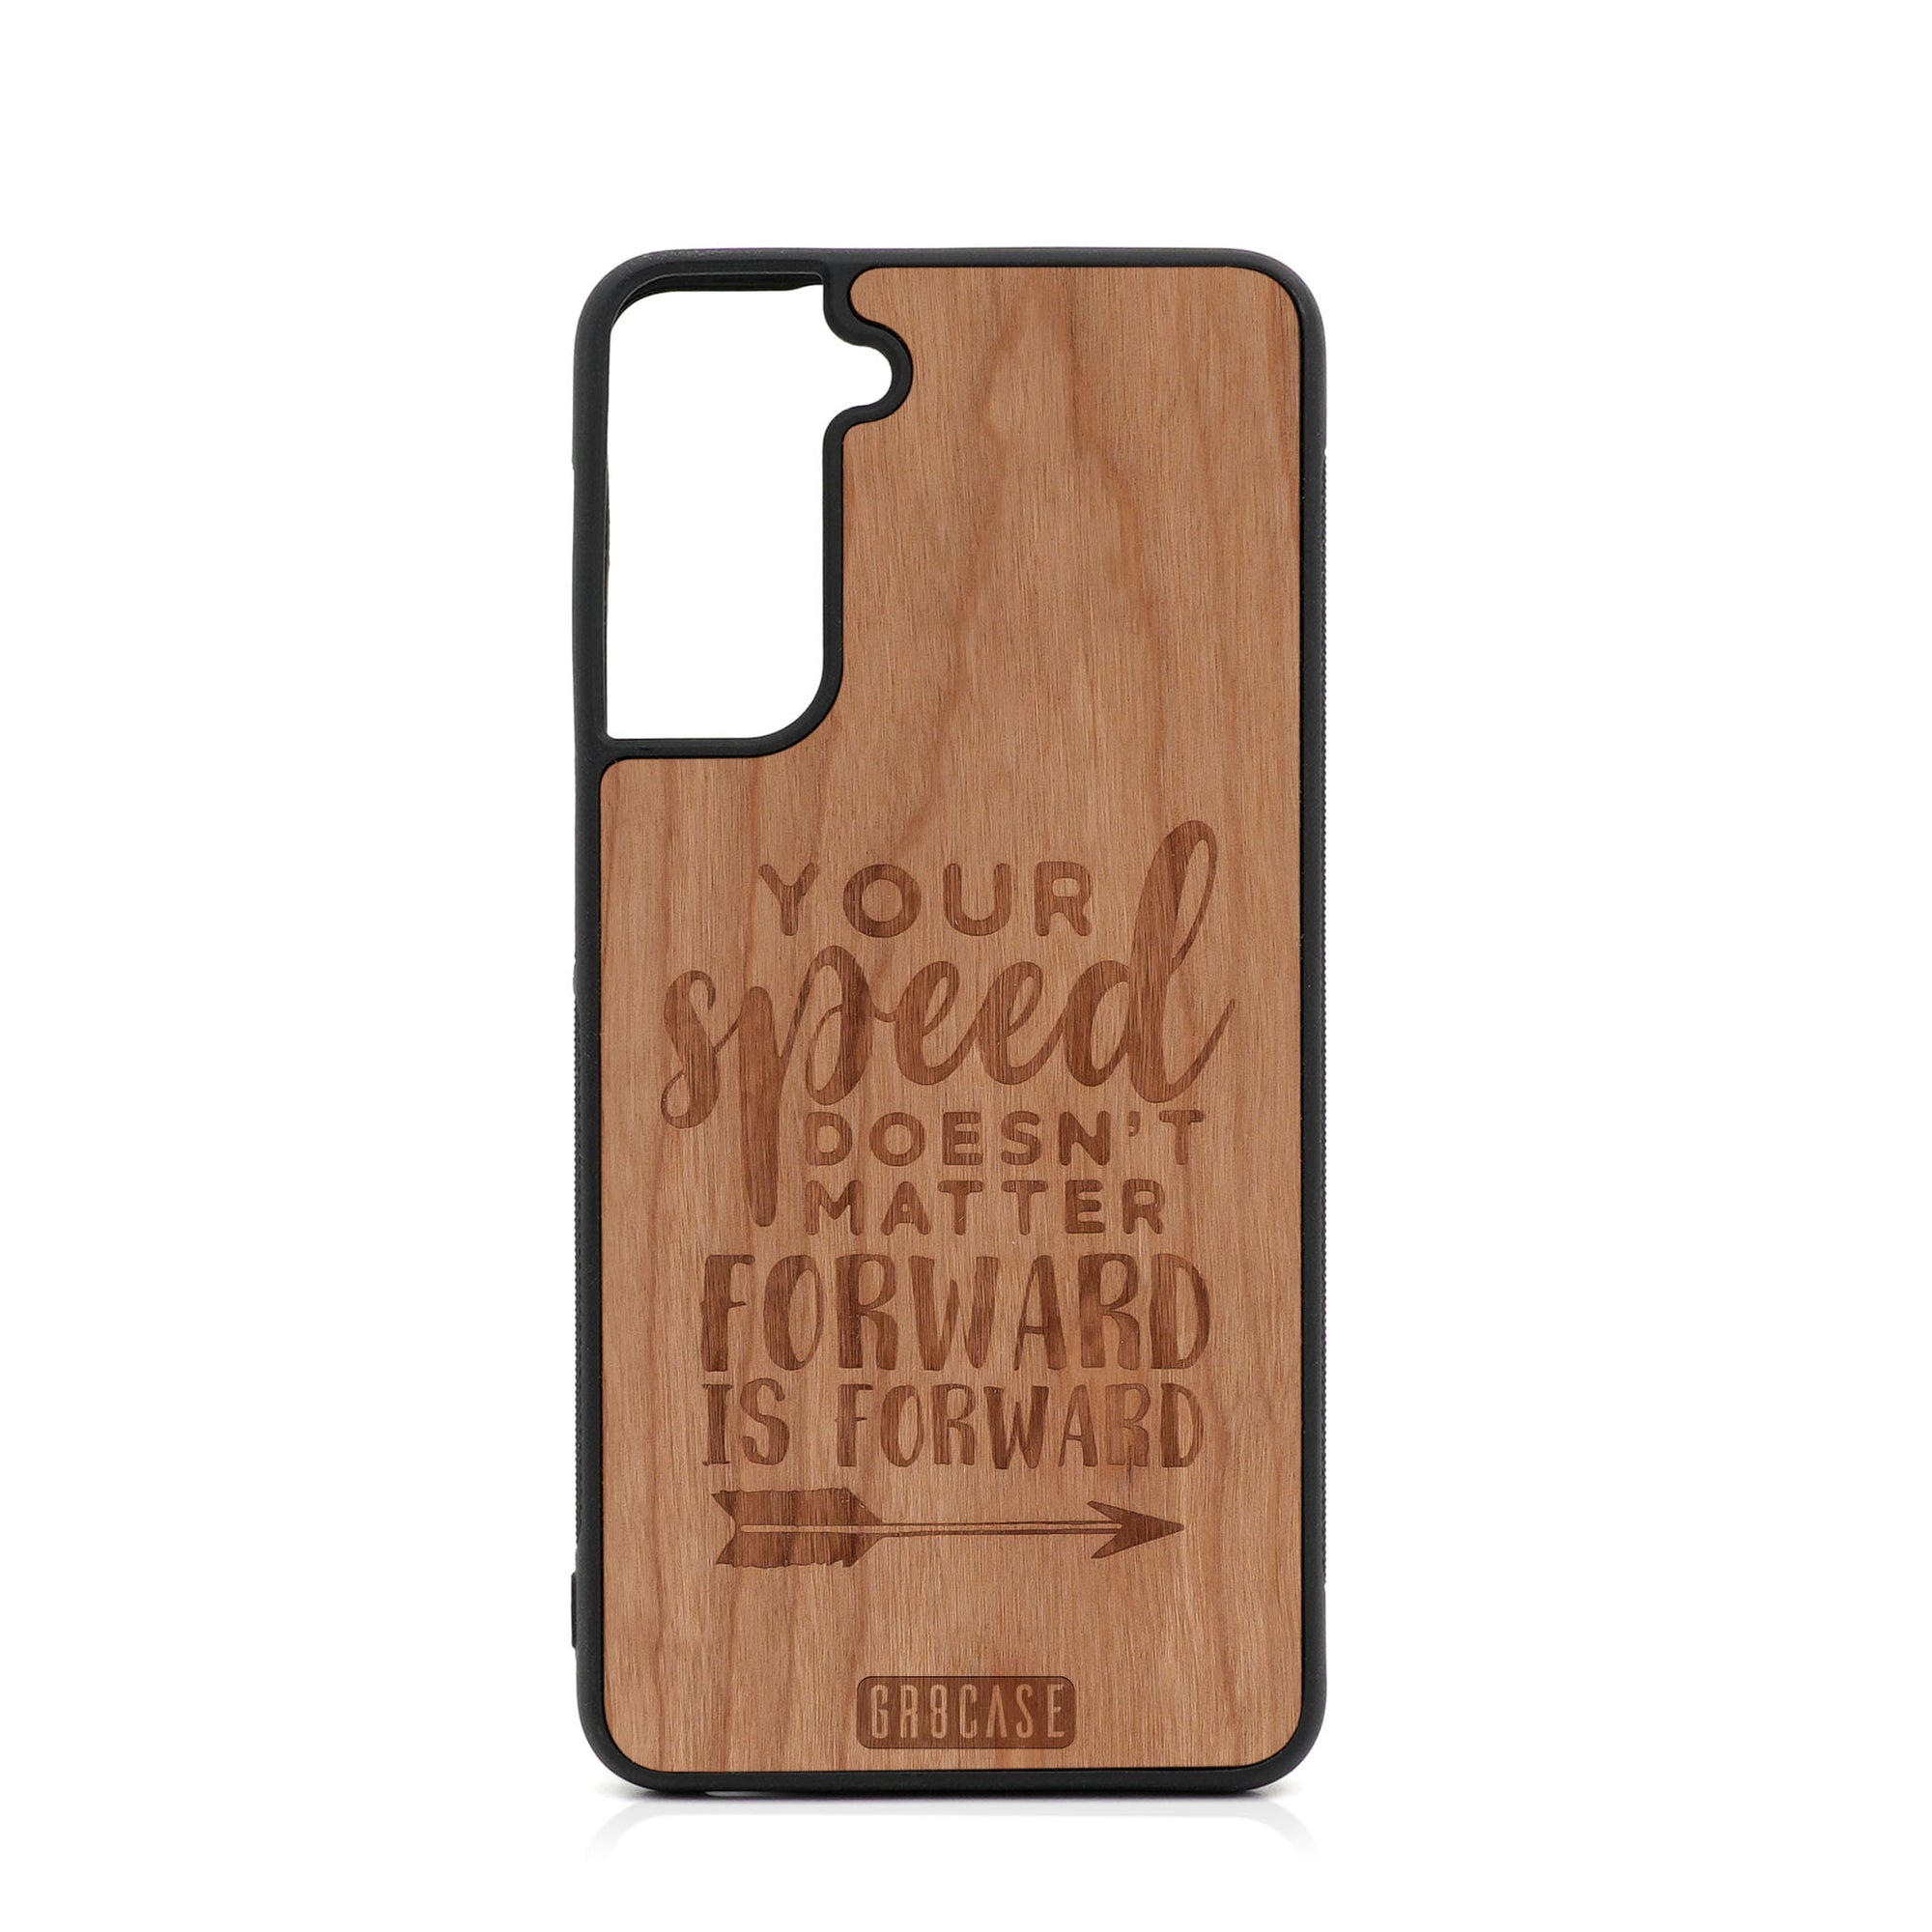 Your Speed Doesn't Matter Forward Is Forward Design Wood Case For Samsung Galaxy S21 Plus 5G